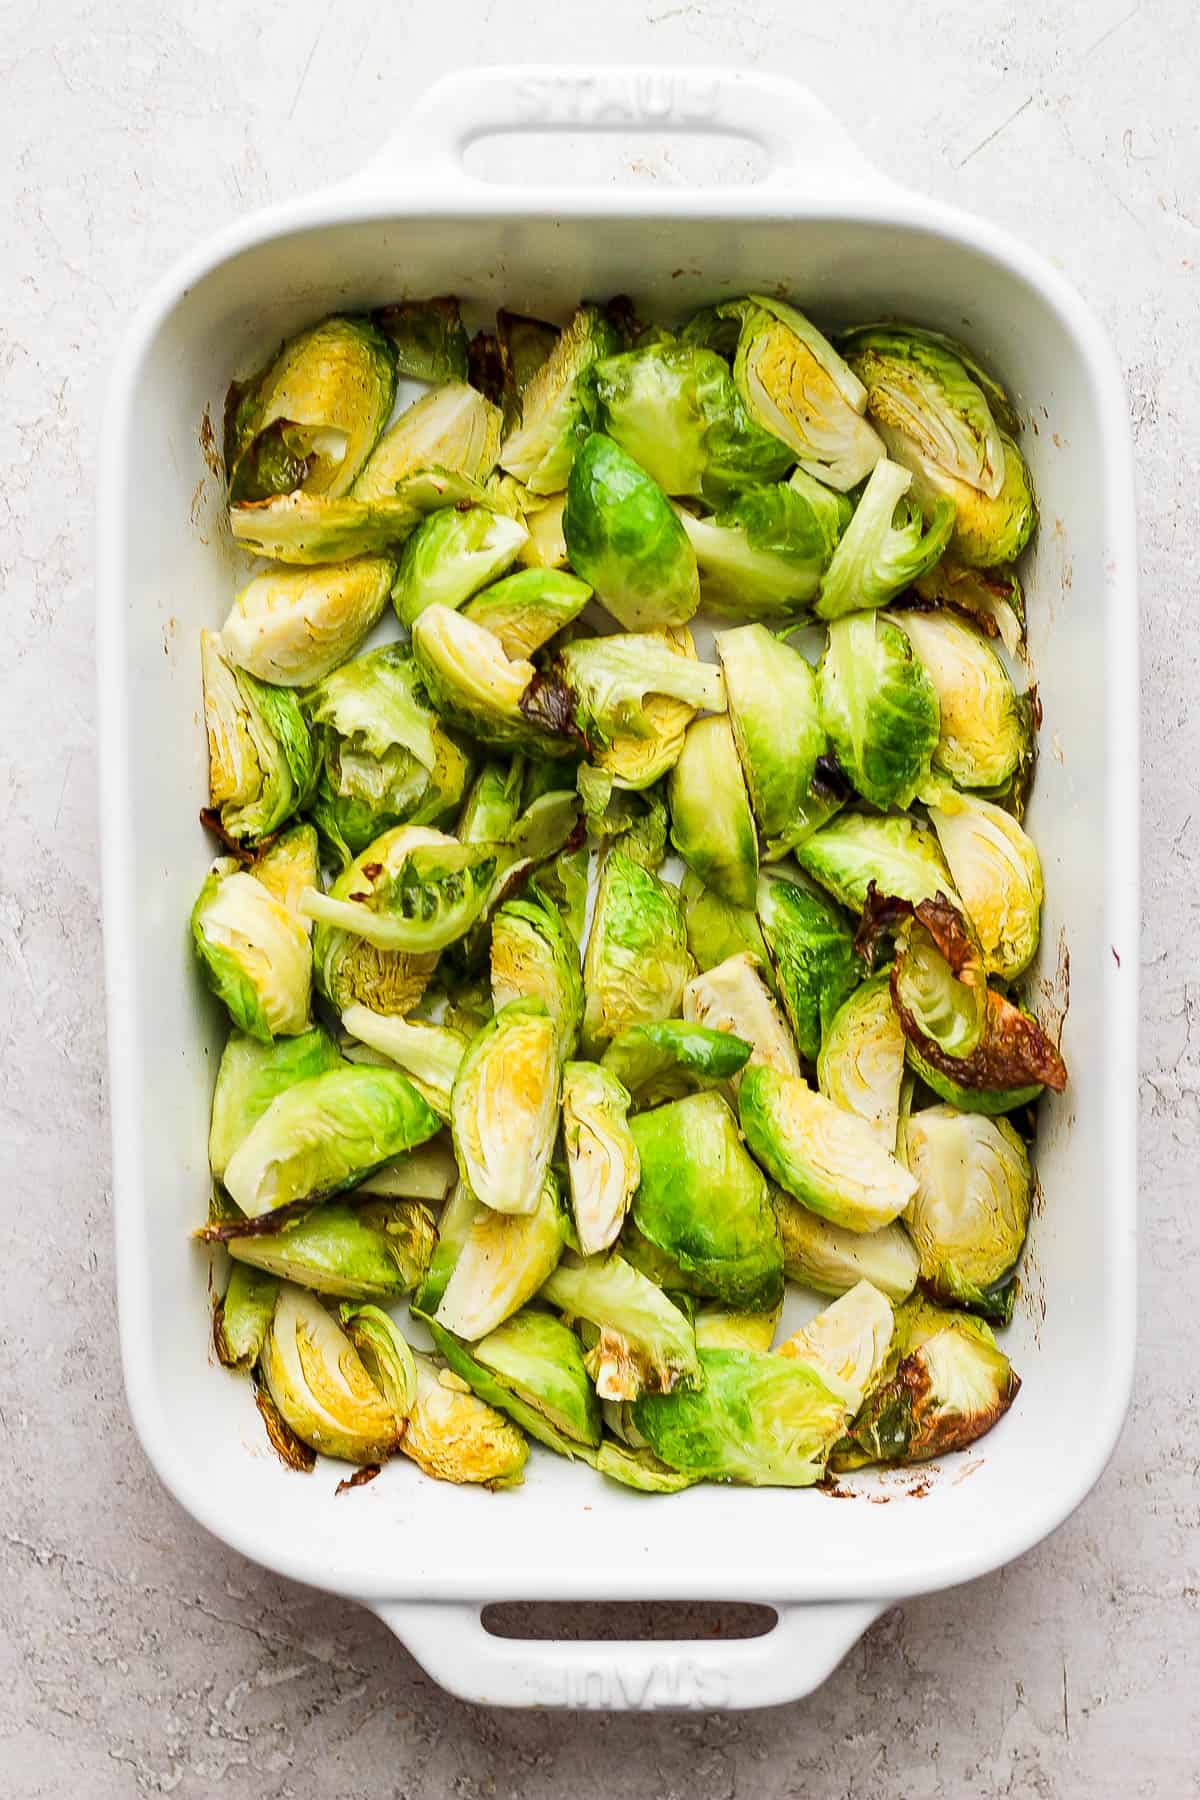 Roasted brussels sprouts in a casserole dish.